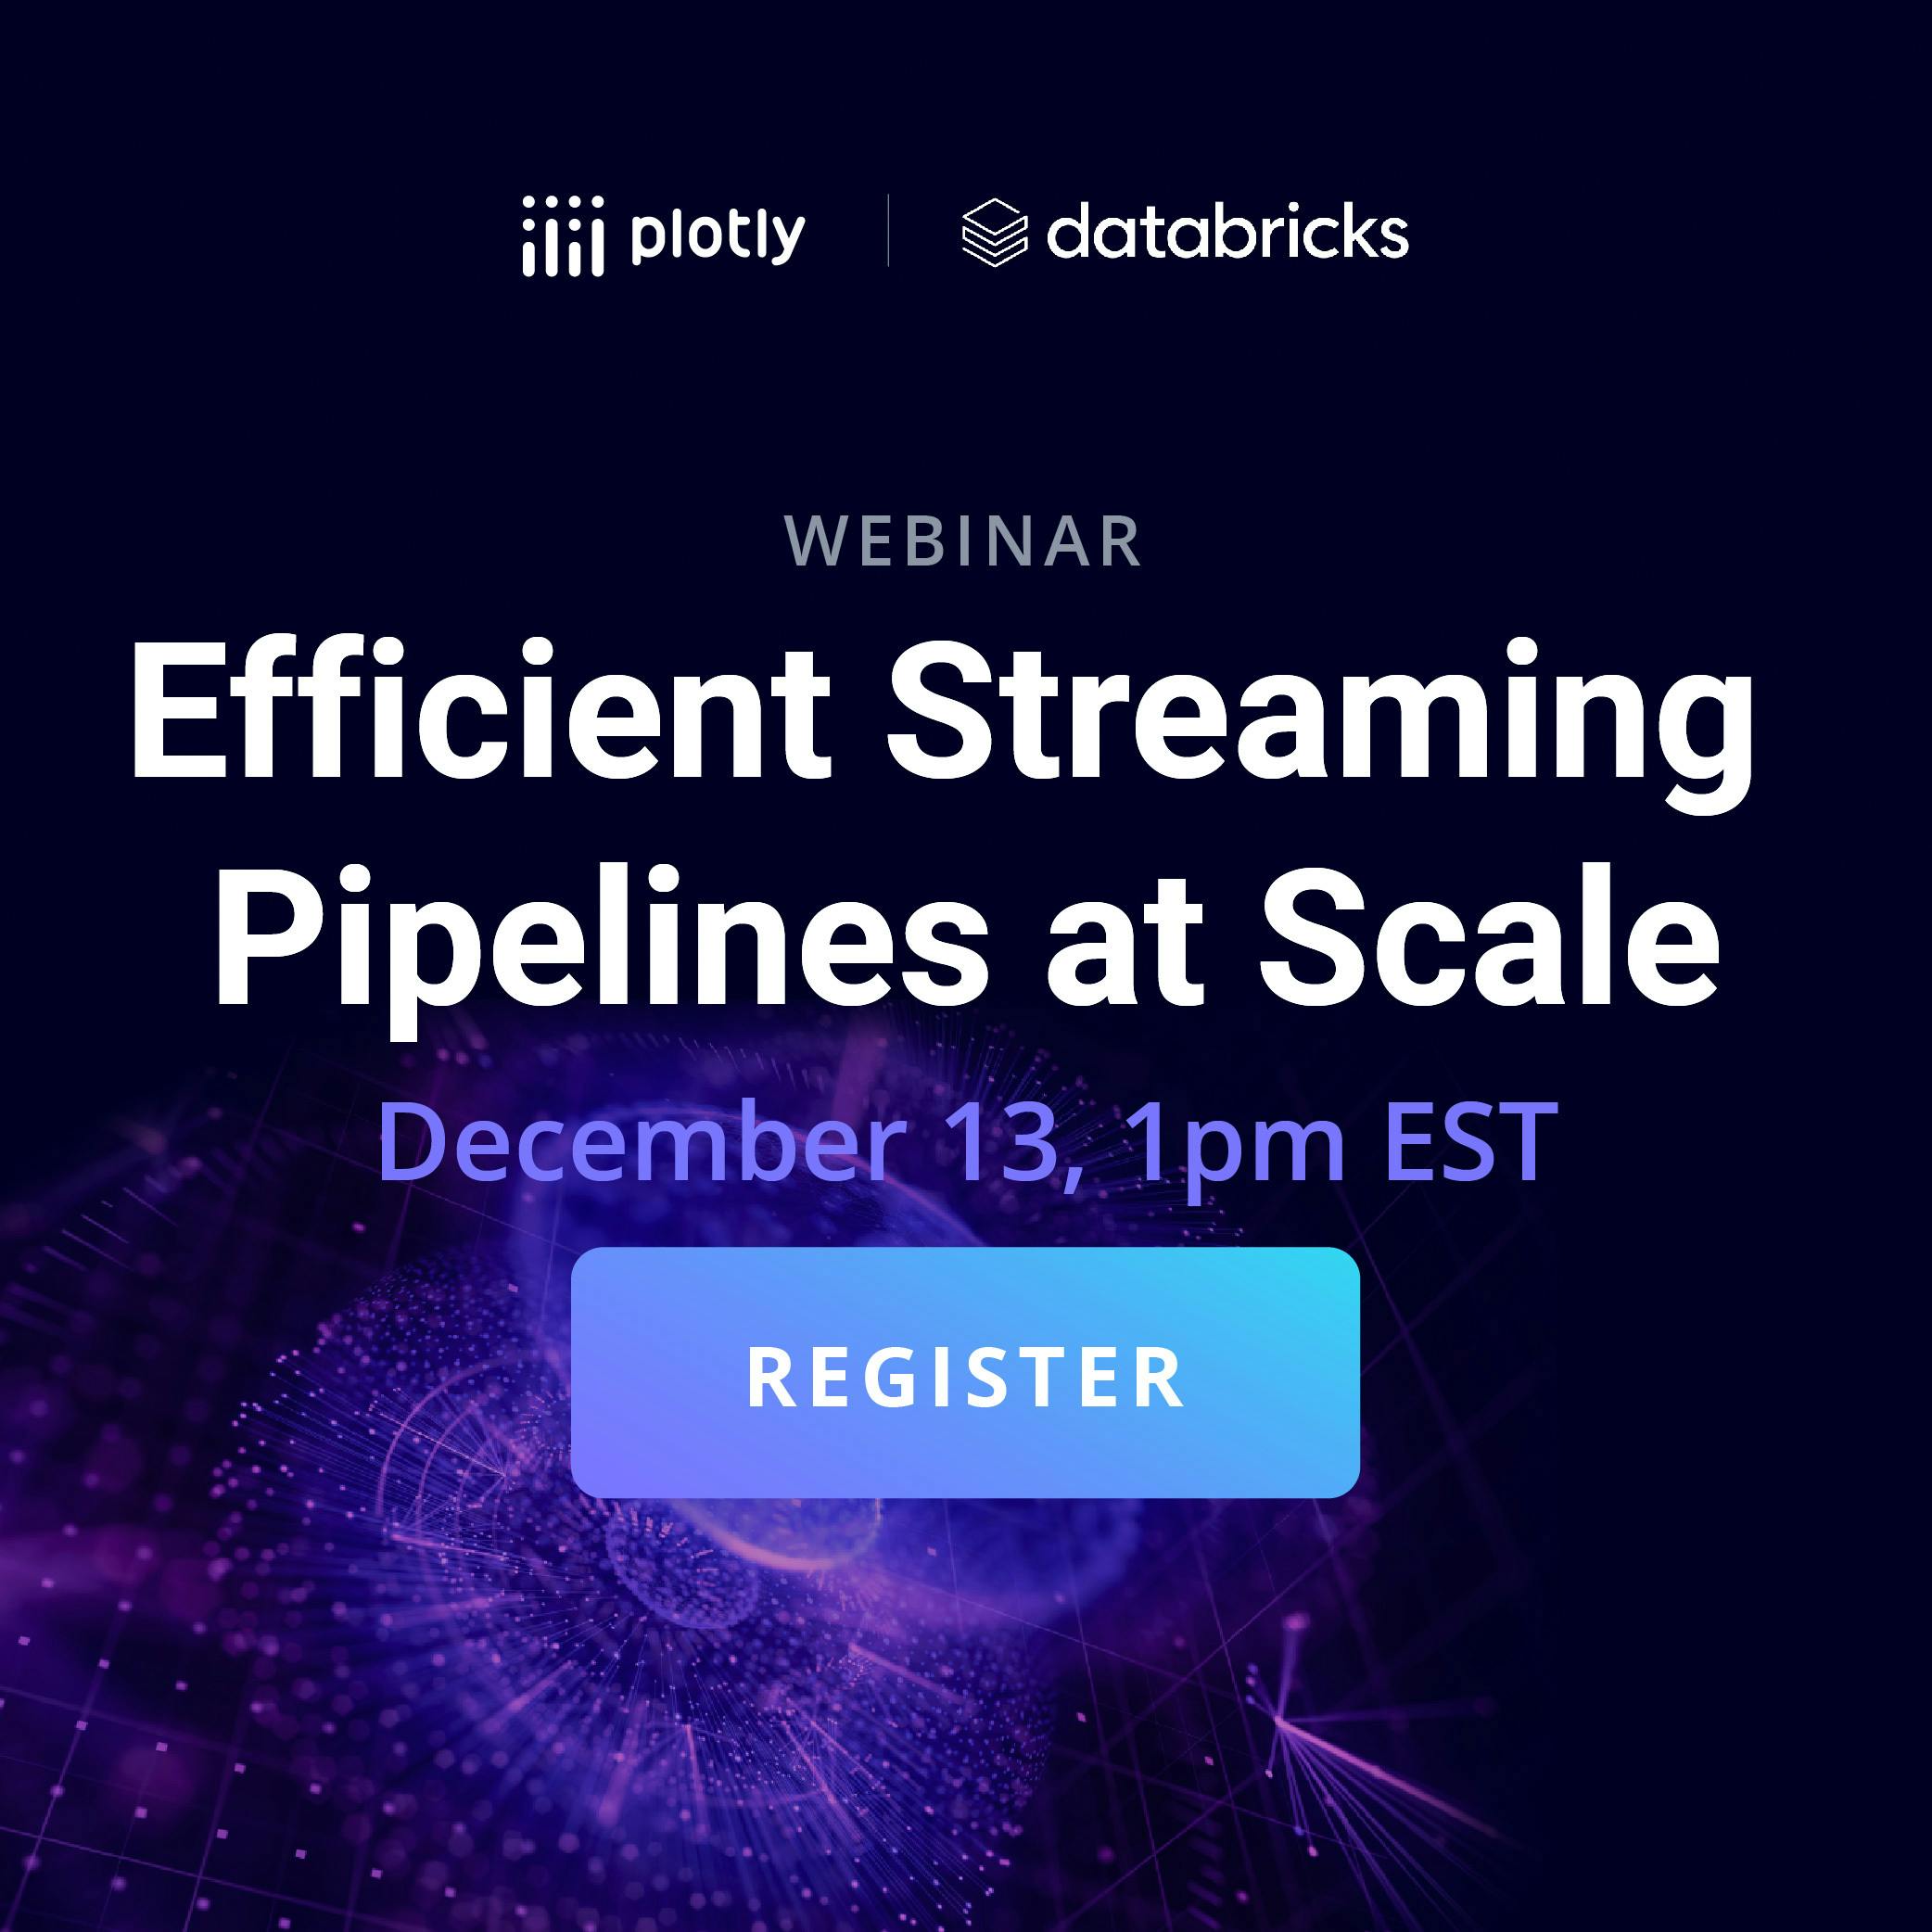 Register for the upcoming webinar: Efficient Streaming Pipelines at Scale.